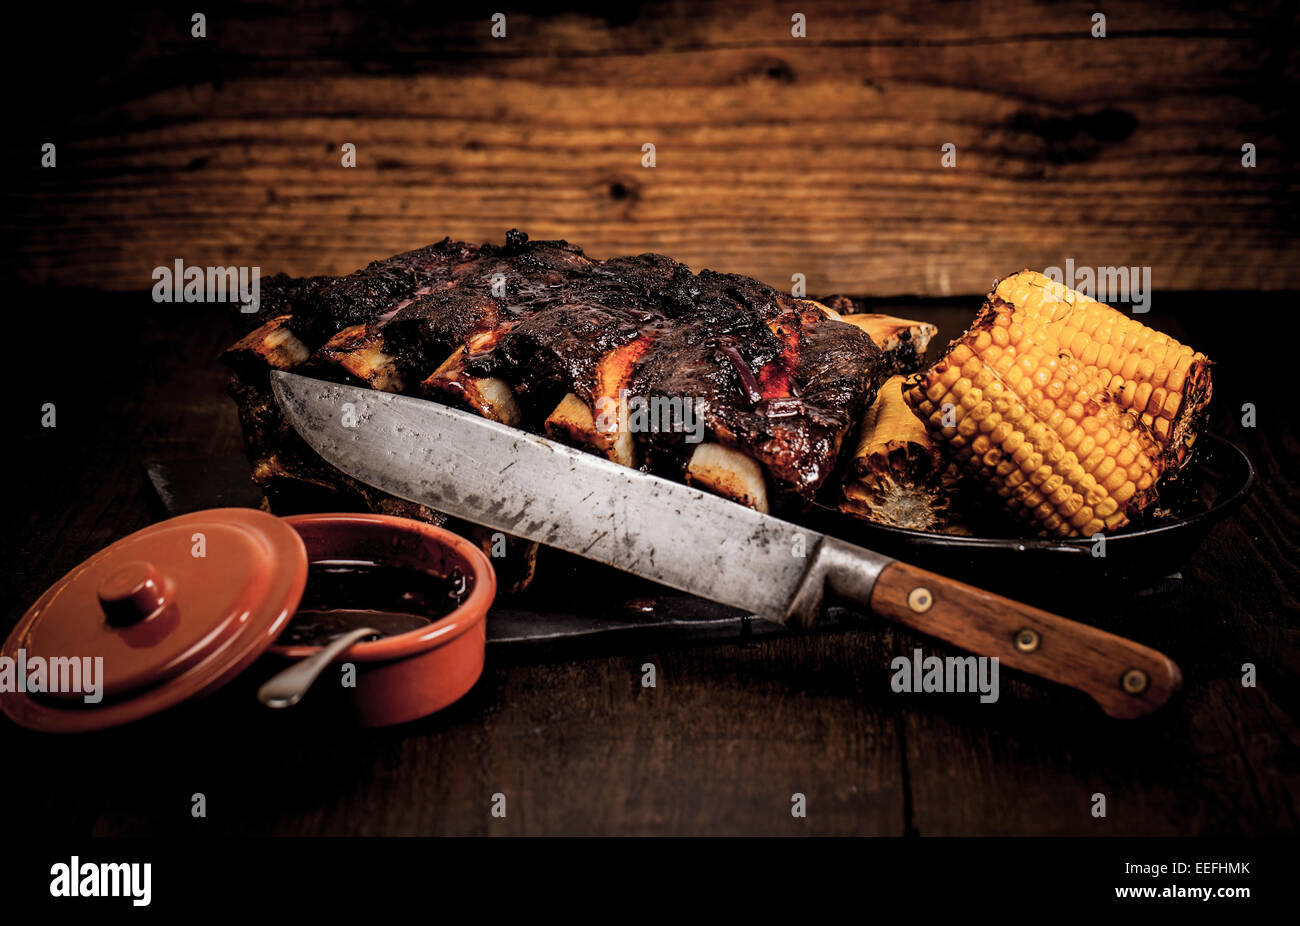 Beef ribs cooked on the BBQ and served with sweetcorn and a red wine souse. Stock Photo